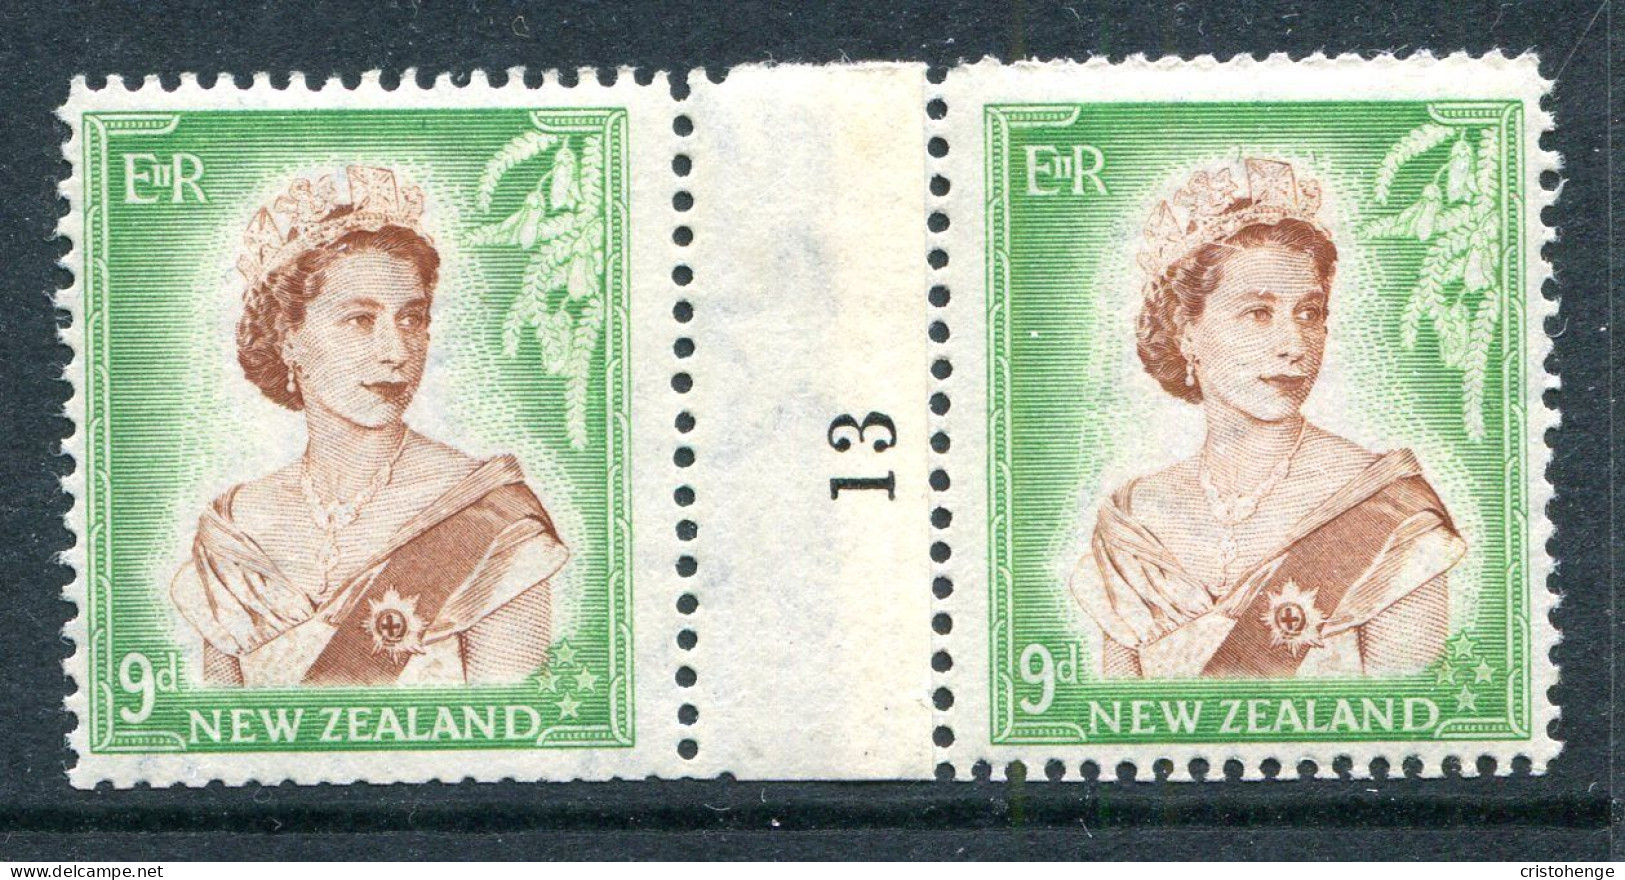 New Zealand 1953-59 QEII Definitives - Coil Pairs - 9d Brown & Green - Horizontal - No. 13 - LHM - Unused Stamps